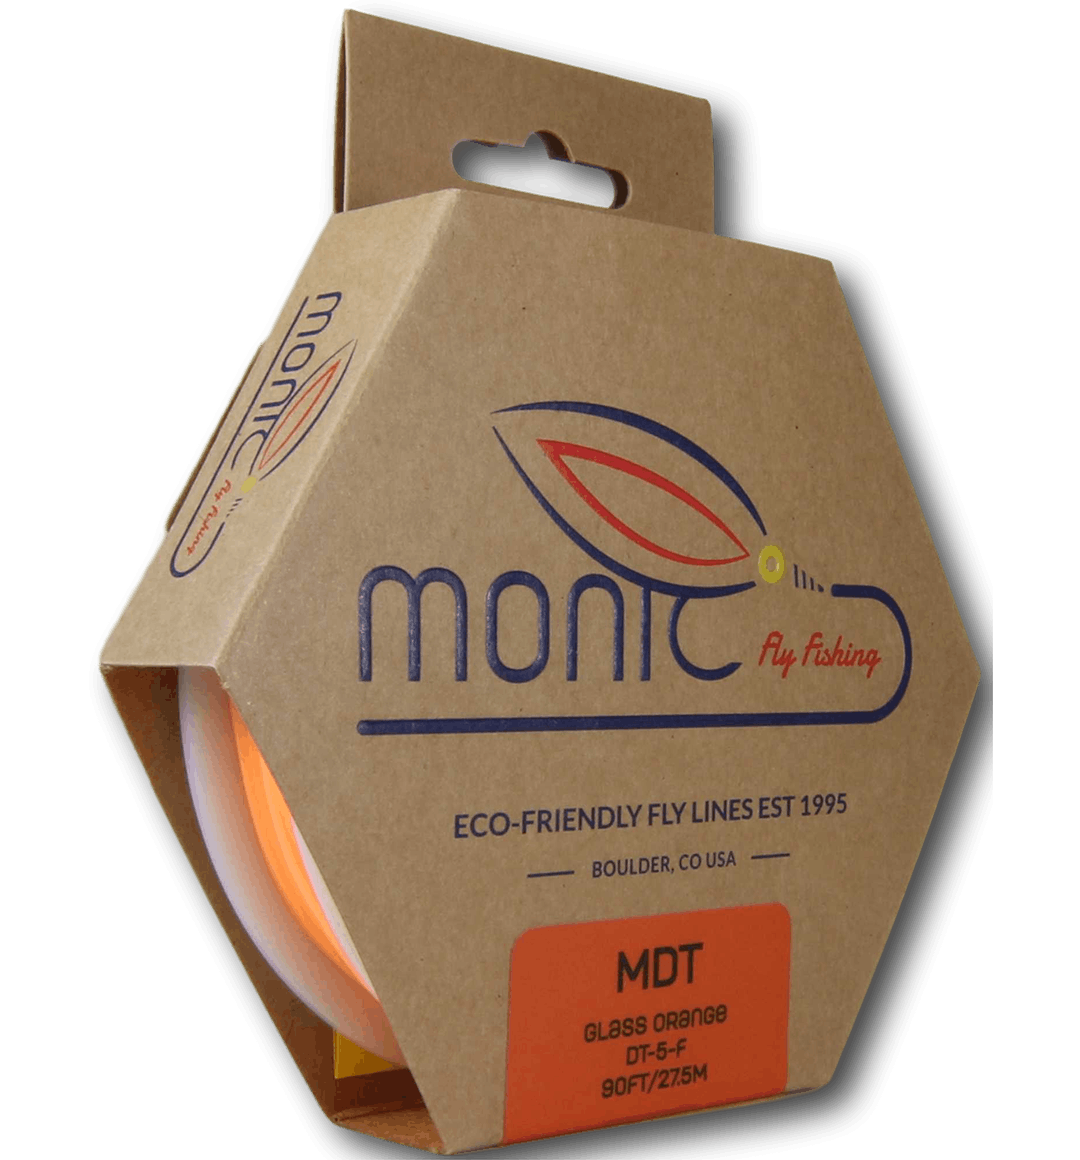 Monic Fly Lines MDT Fly Line